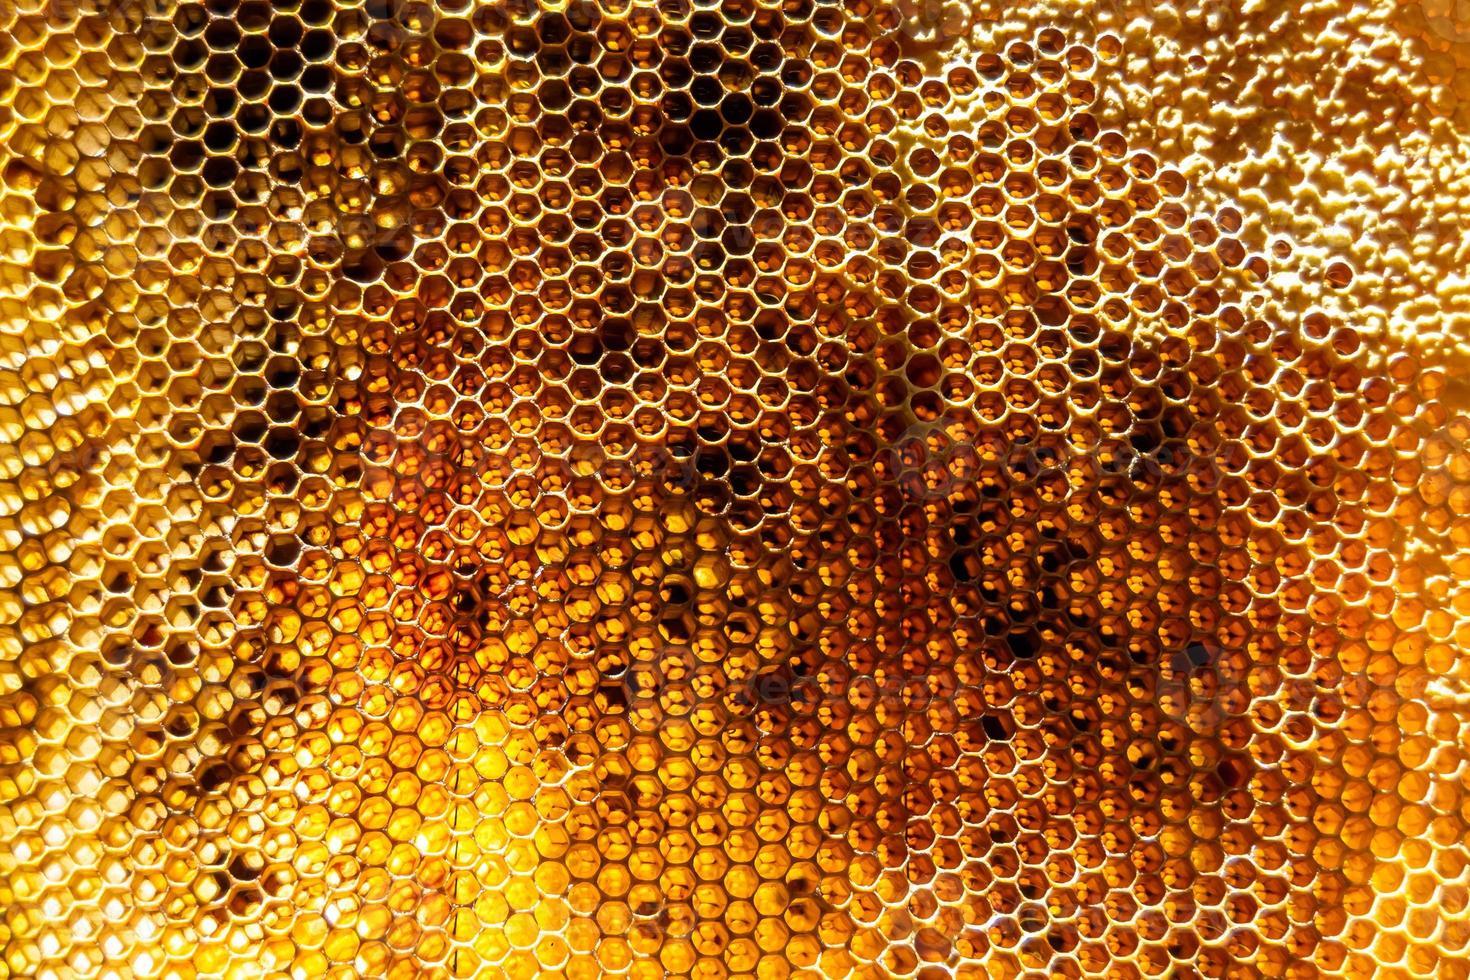 Drop of bee honey drip from hexagonal honeycombs filled with golden nectar photo